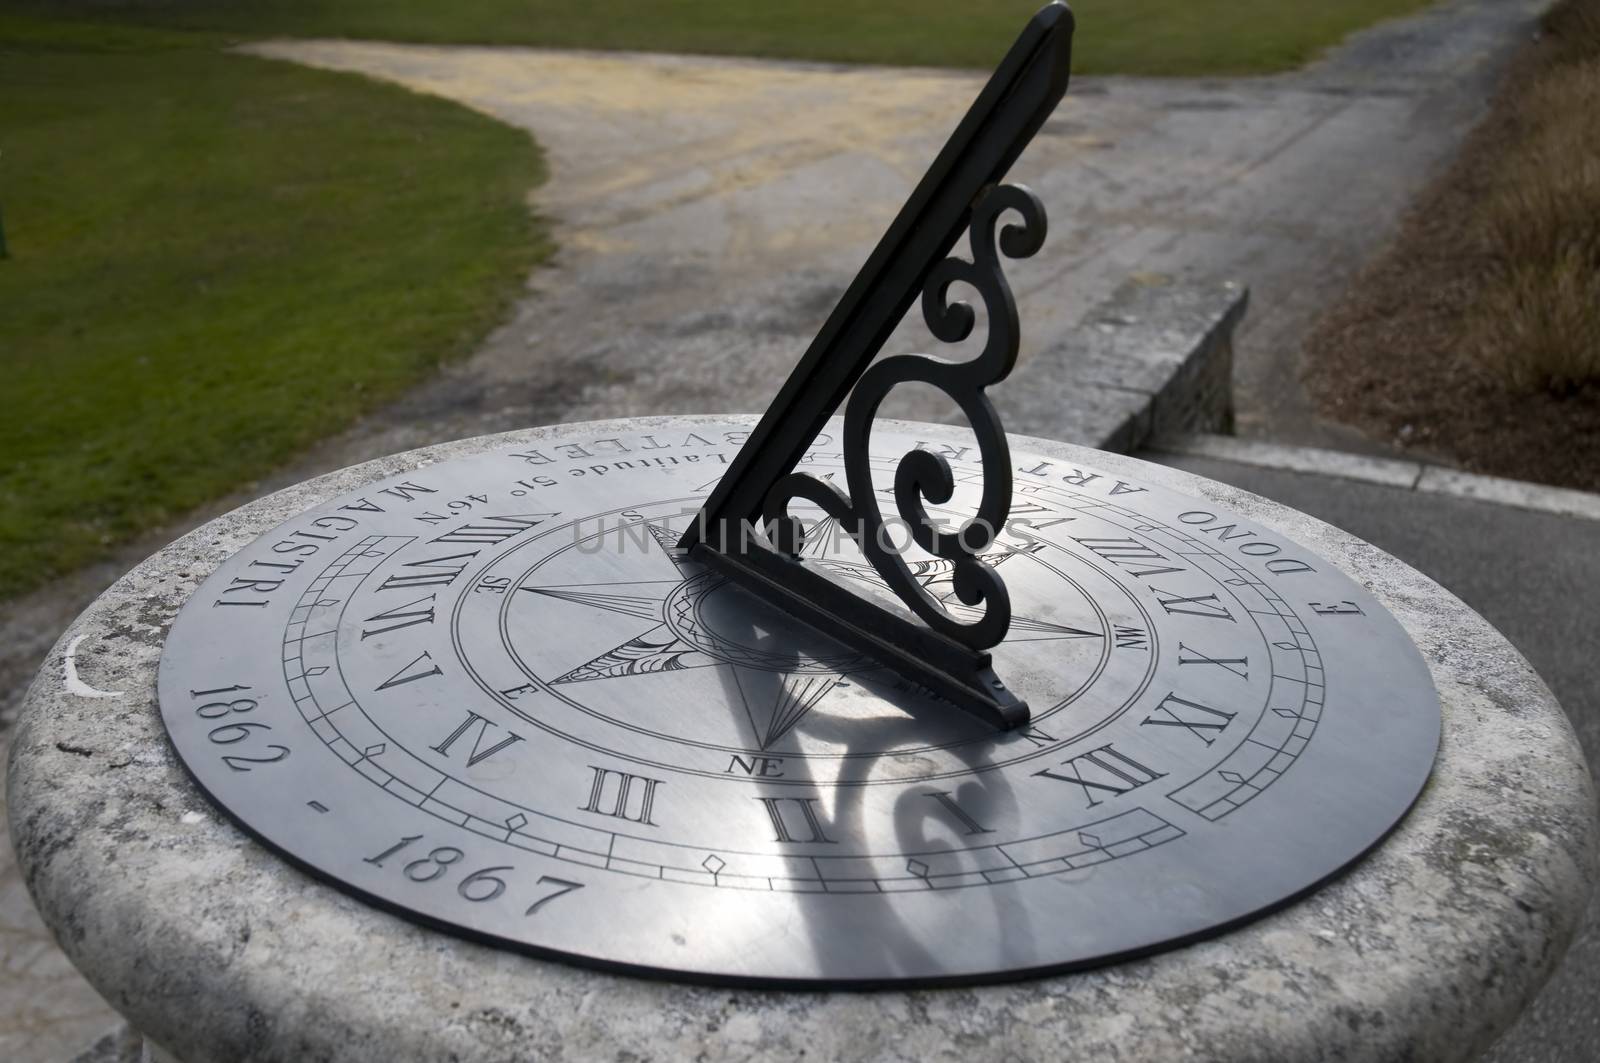 An old sundial showing the time